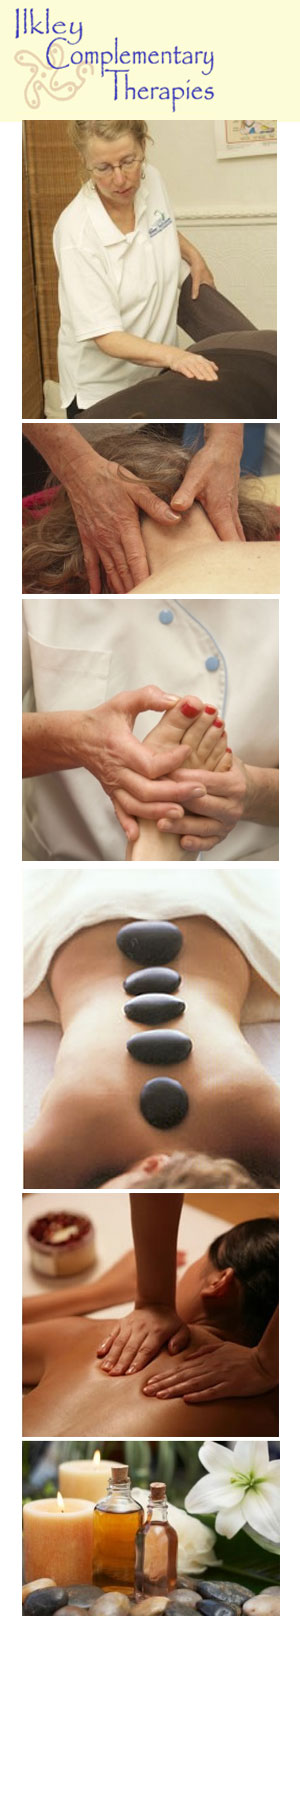 Profile picture for Ilkley Comlementary Therapies